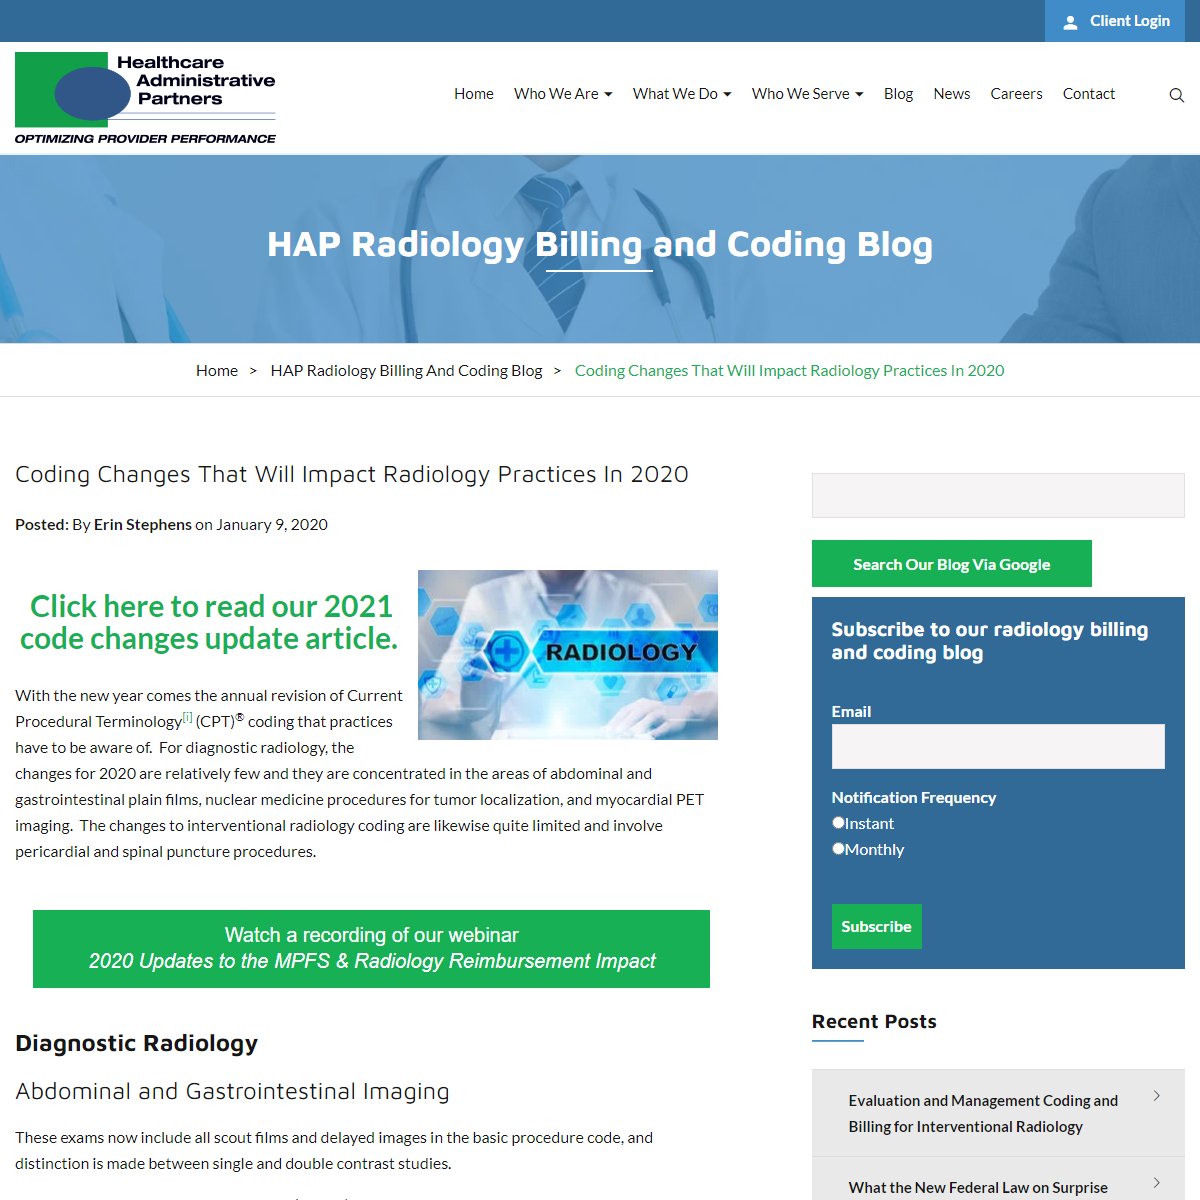 A complete backup of https://info.hapusa.com/blog-0/coding-changes-that-will-impact-radiology-practices-in-2020